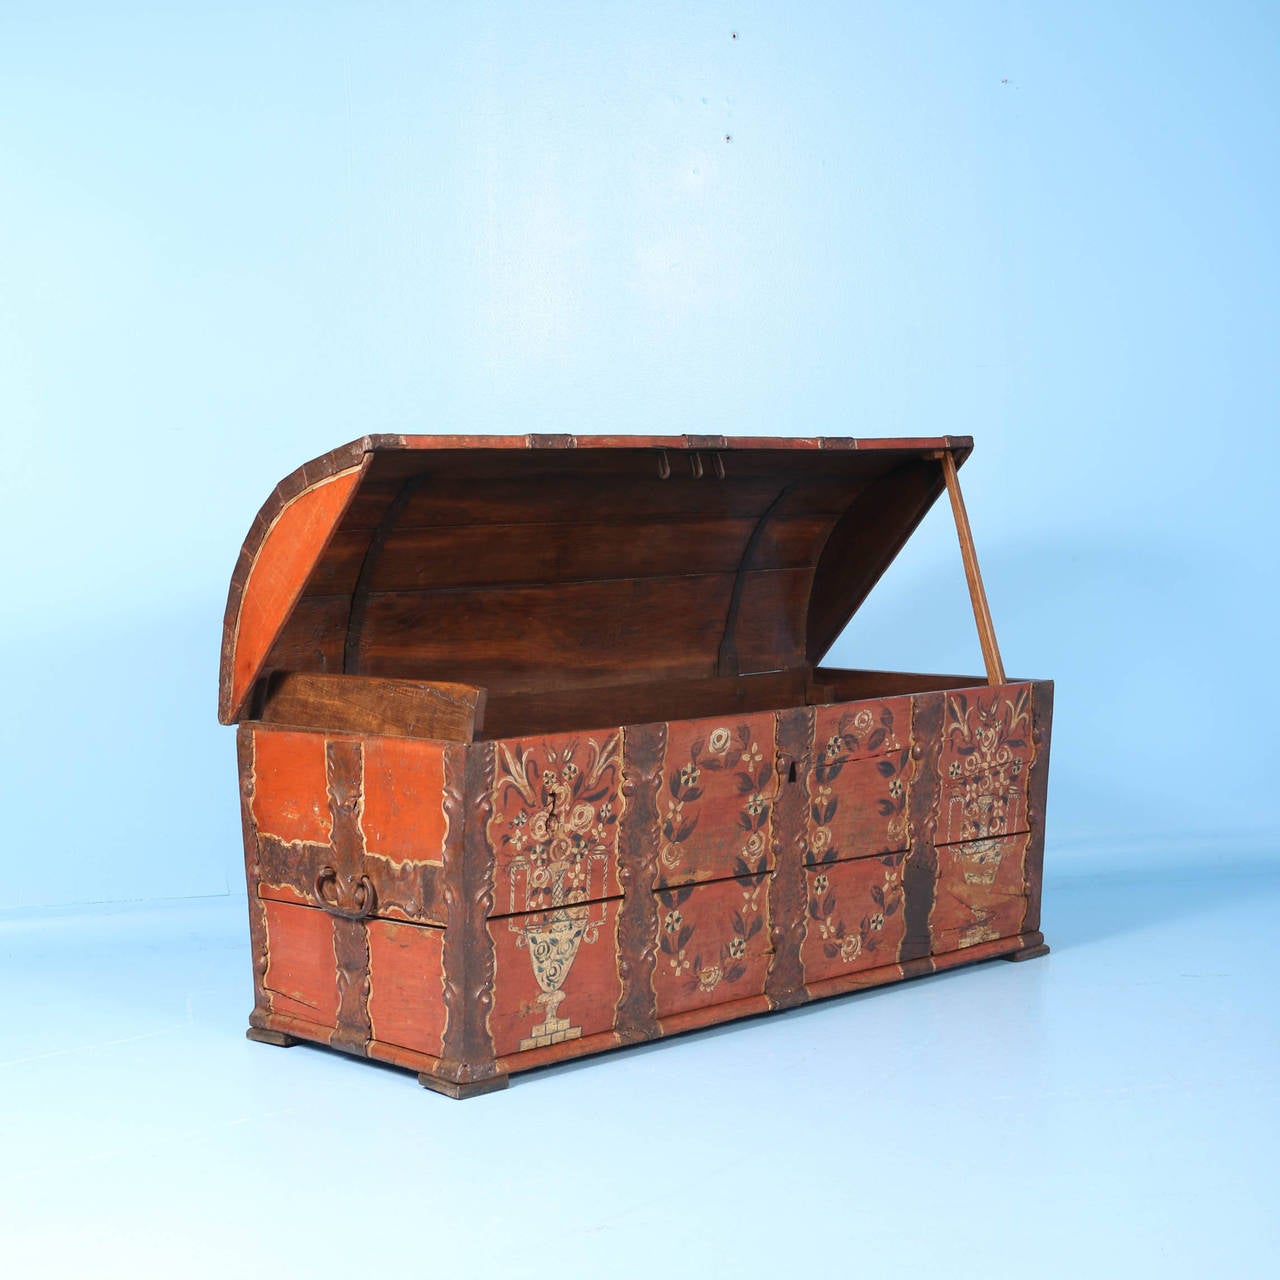 This stunning trunk still maintains its original paint, beautiful colors (red with orange undertone) and florals typical of Swedish folk paint style of the 1800s. The hand-wrought iron banding and handles are also impressive. Entire trunk is very